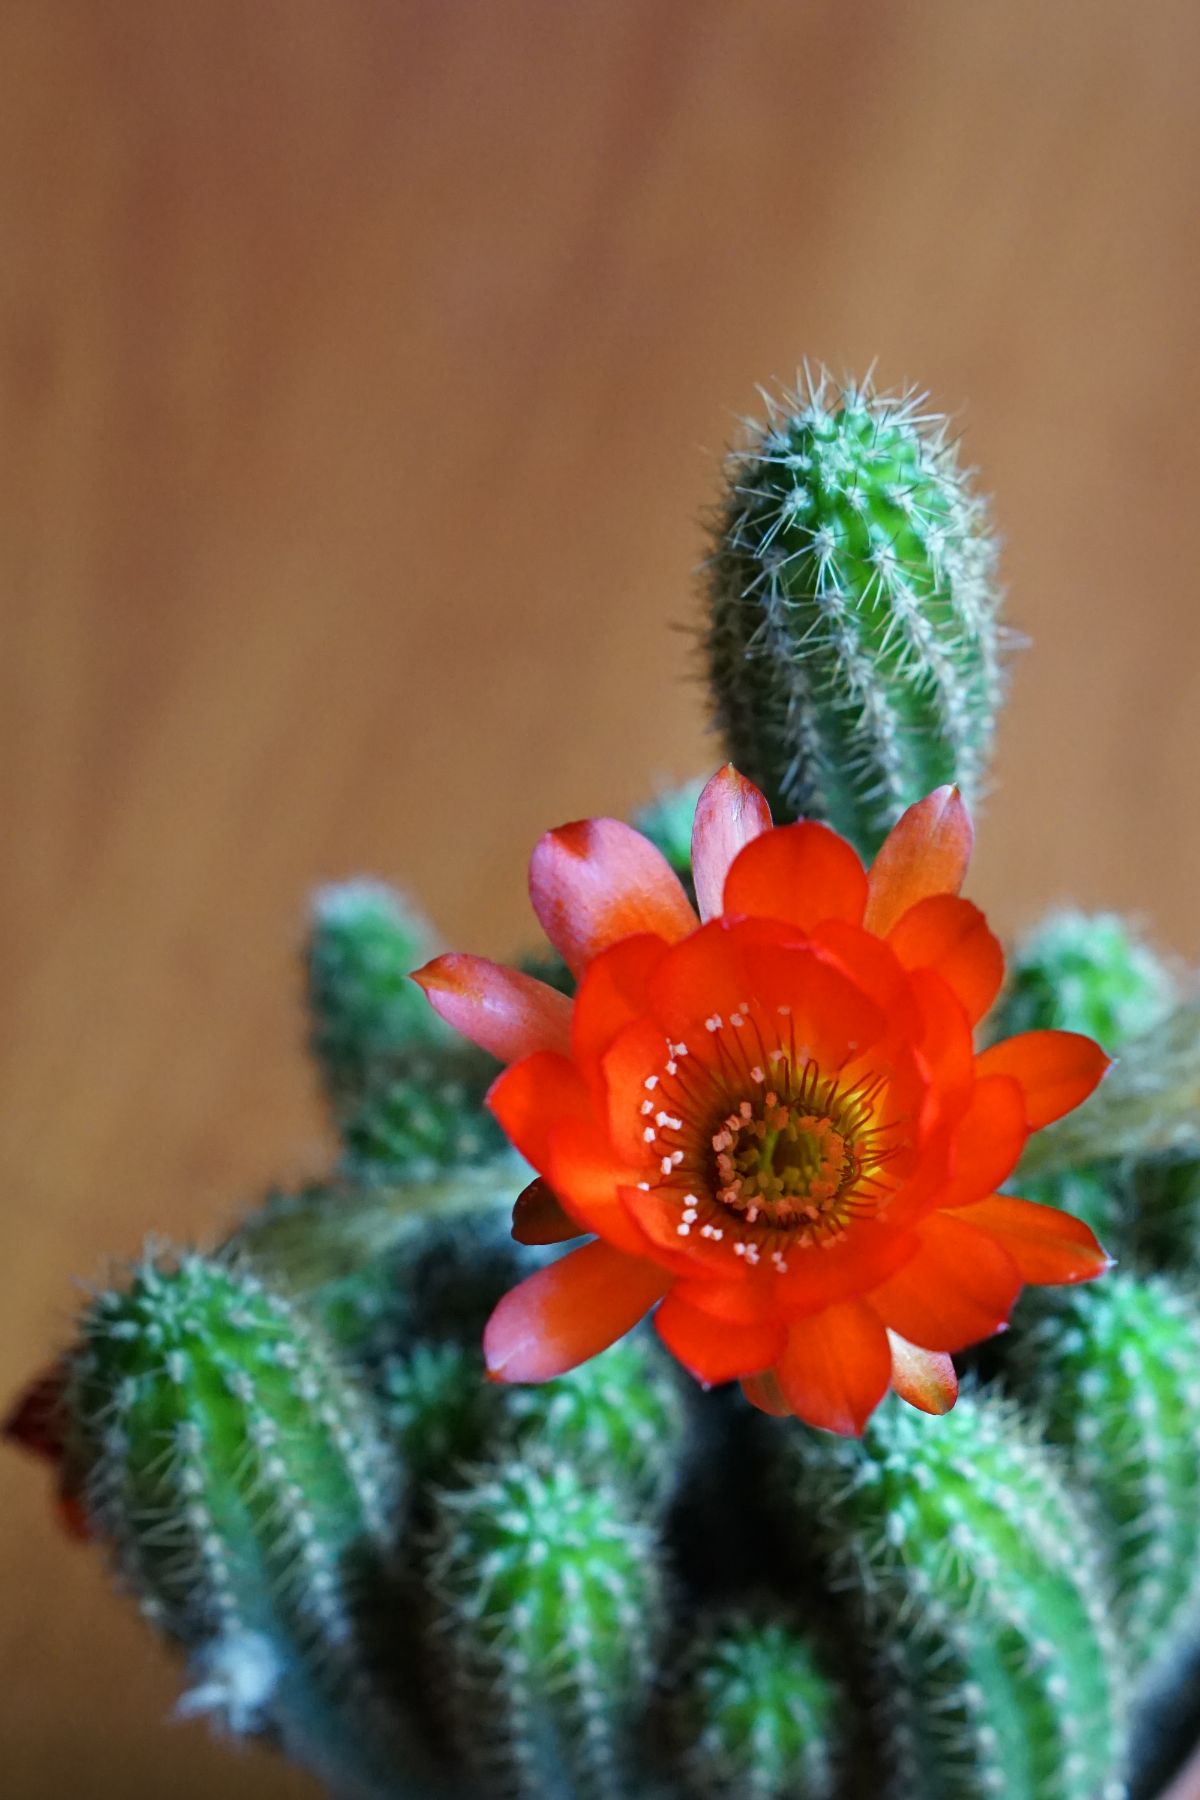 Chamaelobivia cactus with a vibrant.-red flower.